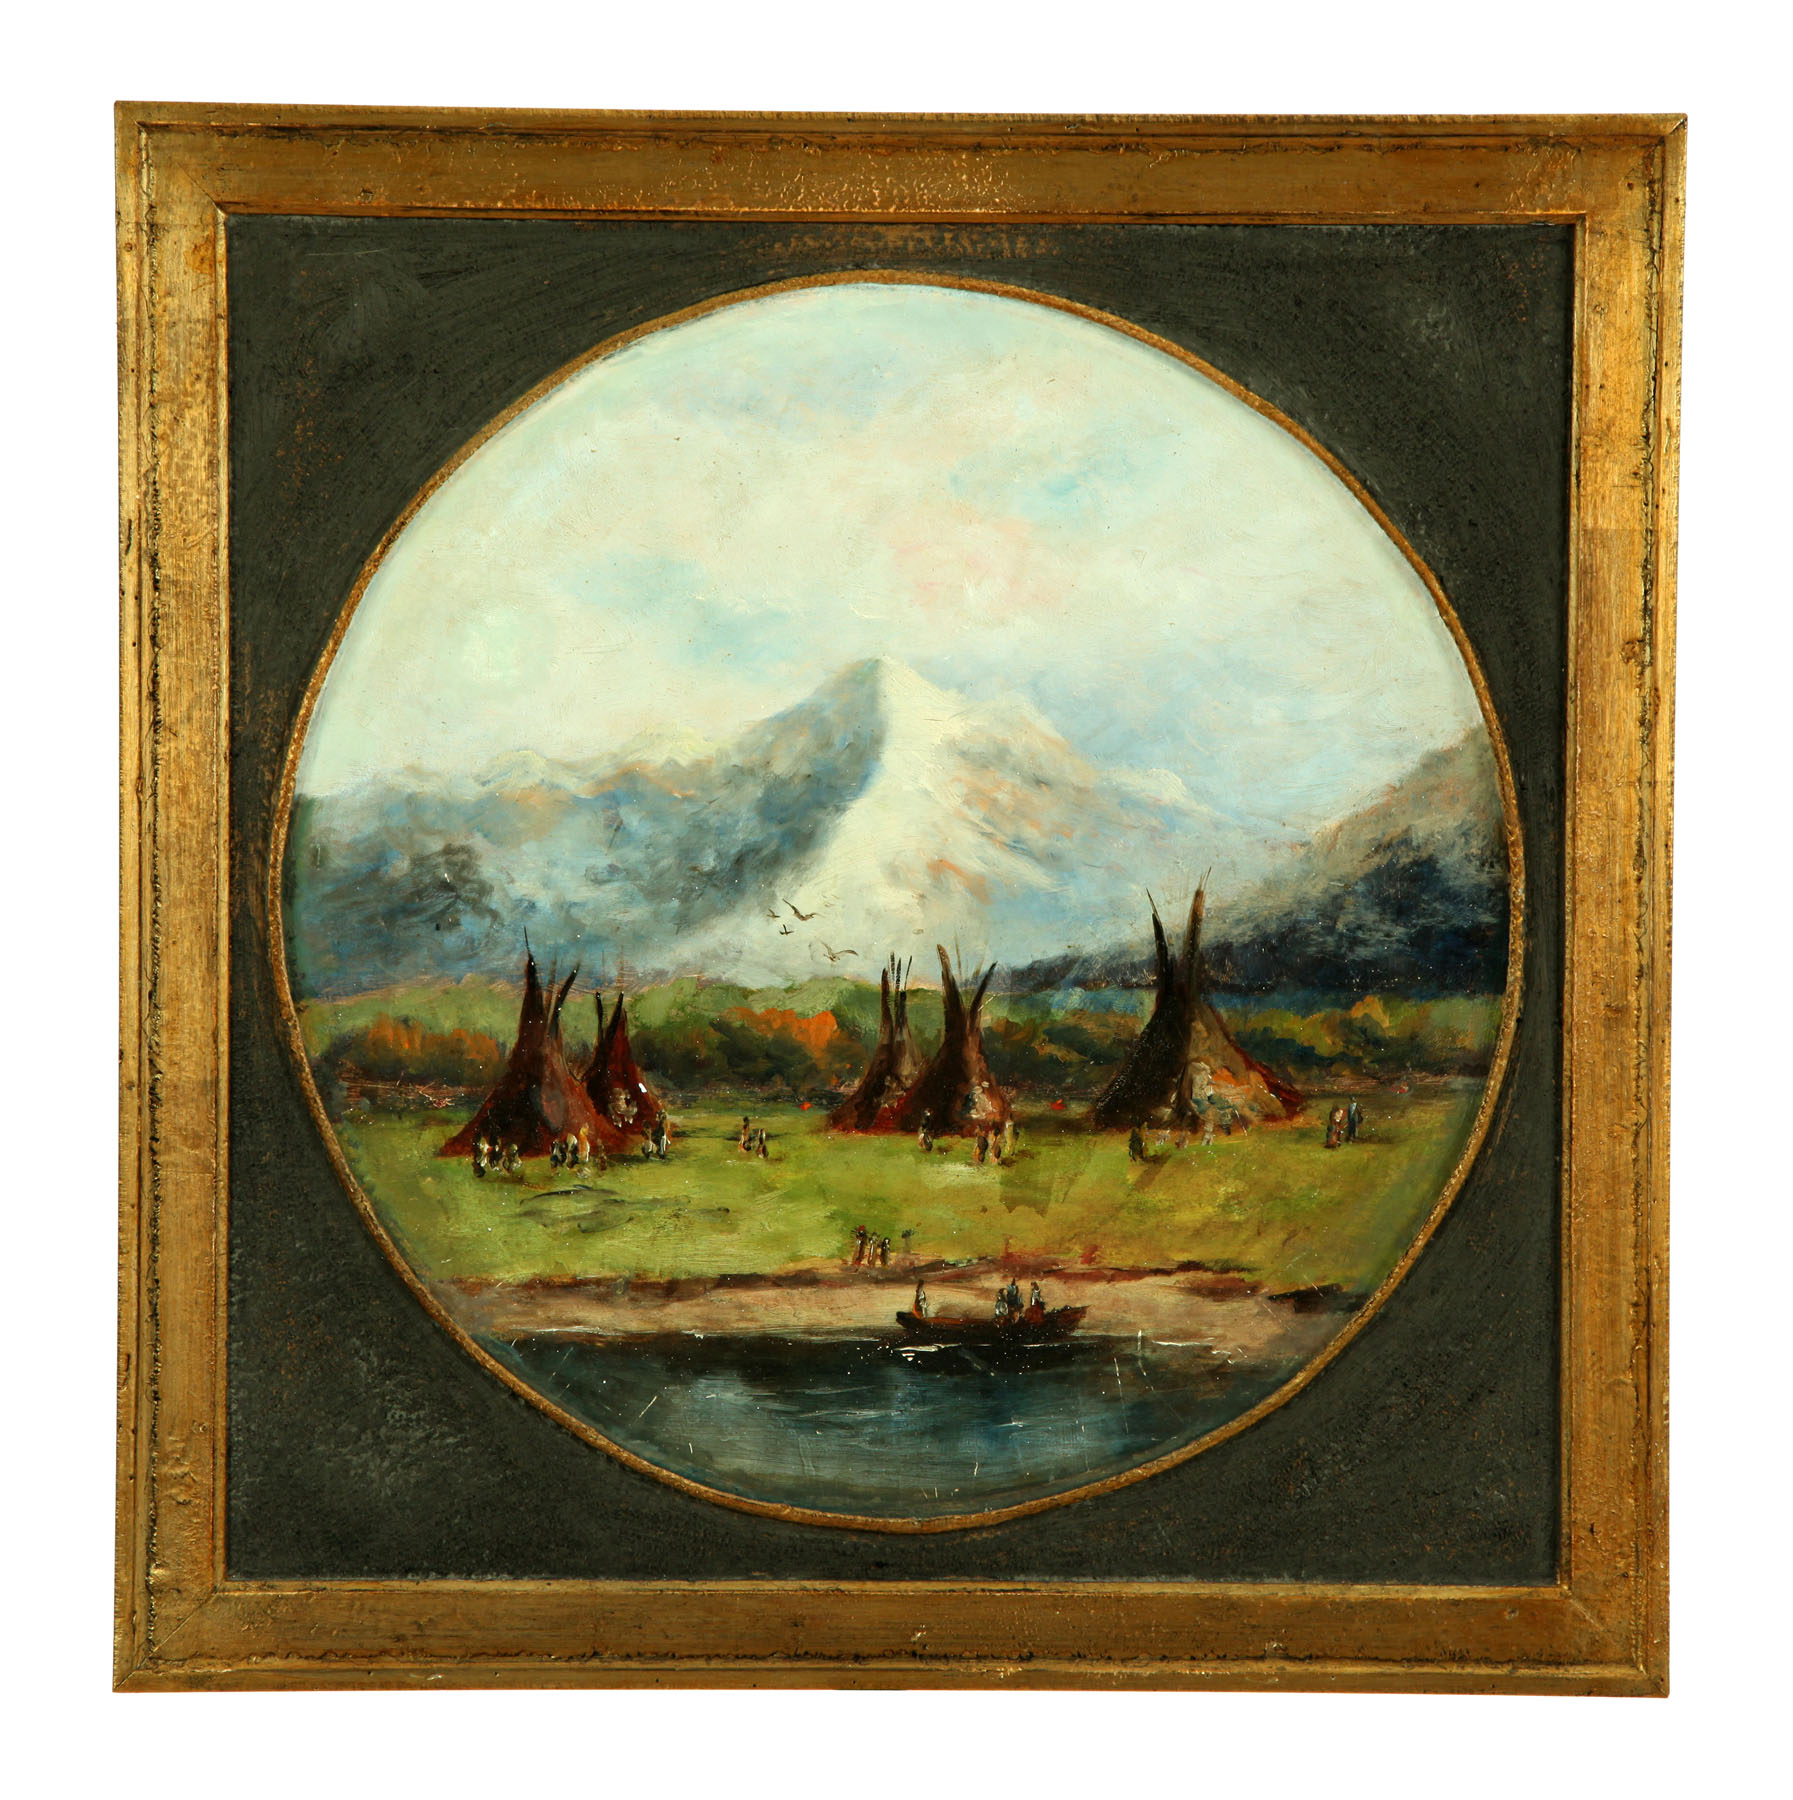 LANDSCAPE WITH INDIANS (AMERICAN